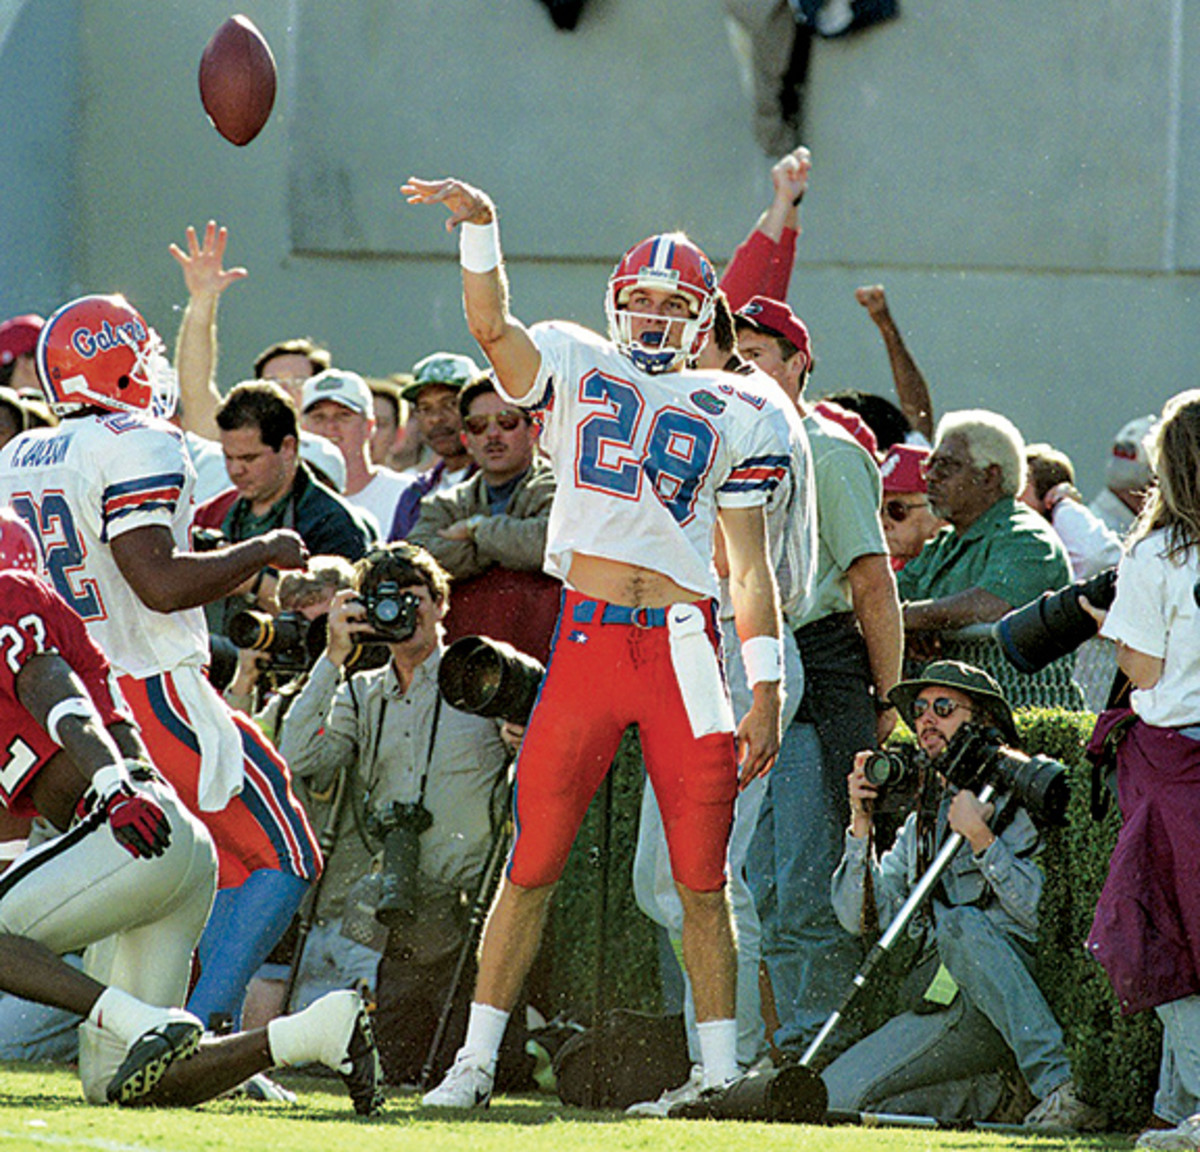 Florida vs. Georgia game in Athens, Ga. on Oct. 28, 1995. Florida WR Chris Doering celebrates a TD catch. One of the five TDs on the day from Danny Wuerffel for the 52-17 win.